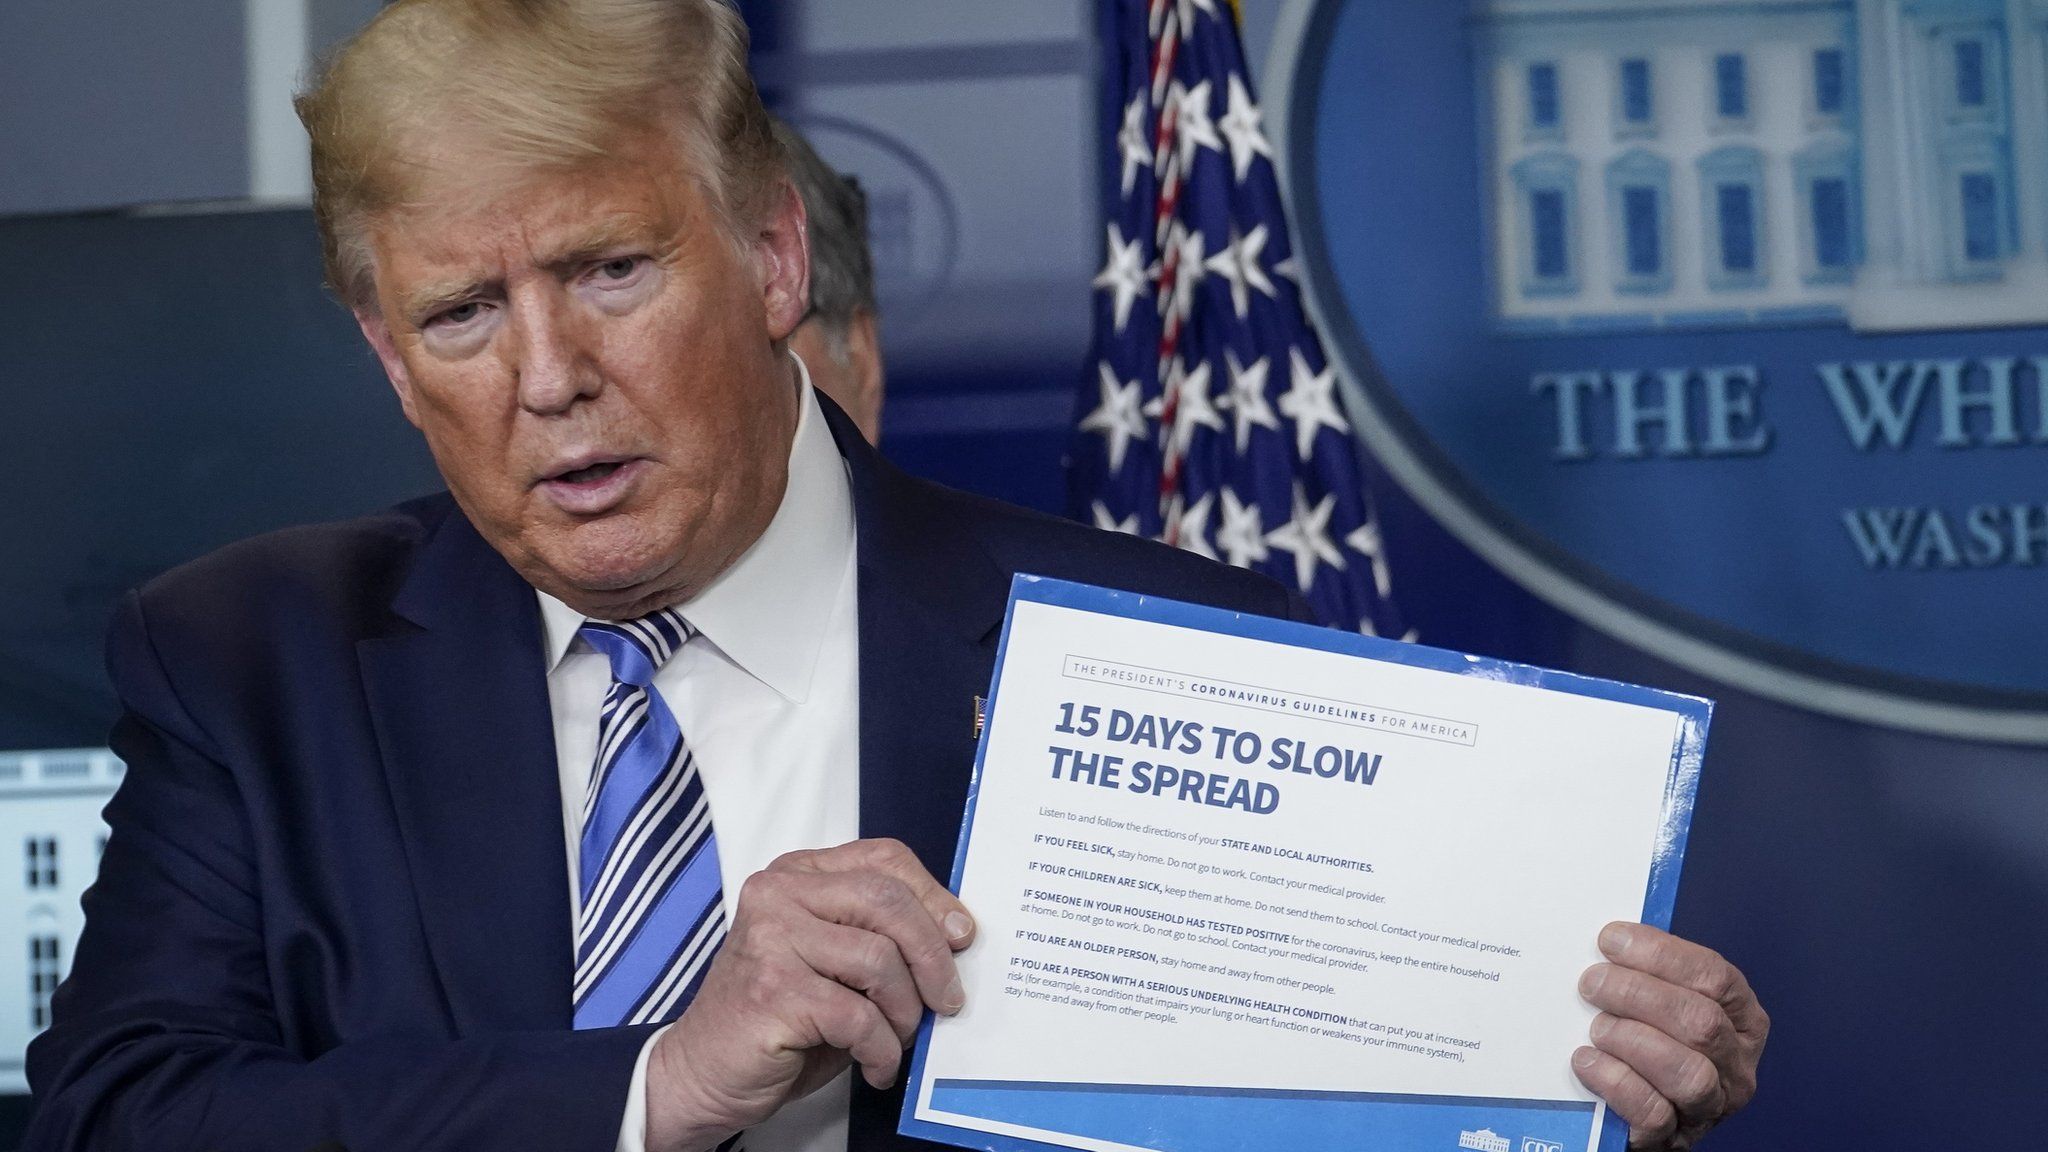 President Donald Trump speaks at the daily coronavirus briefing at the White House on 23 March 2020